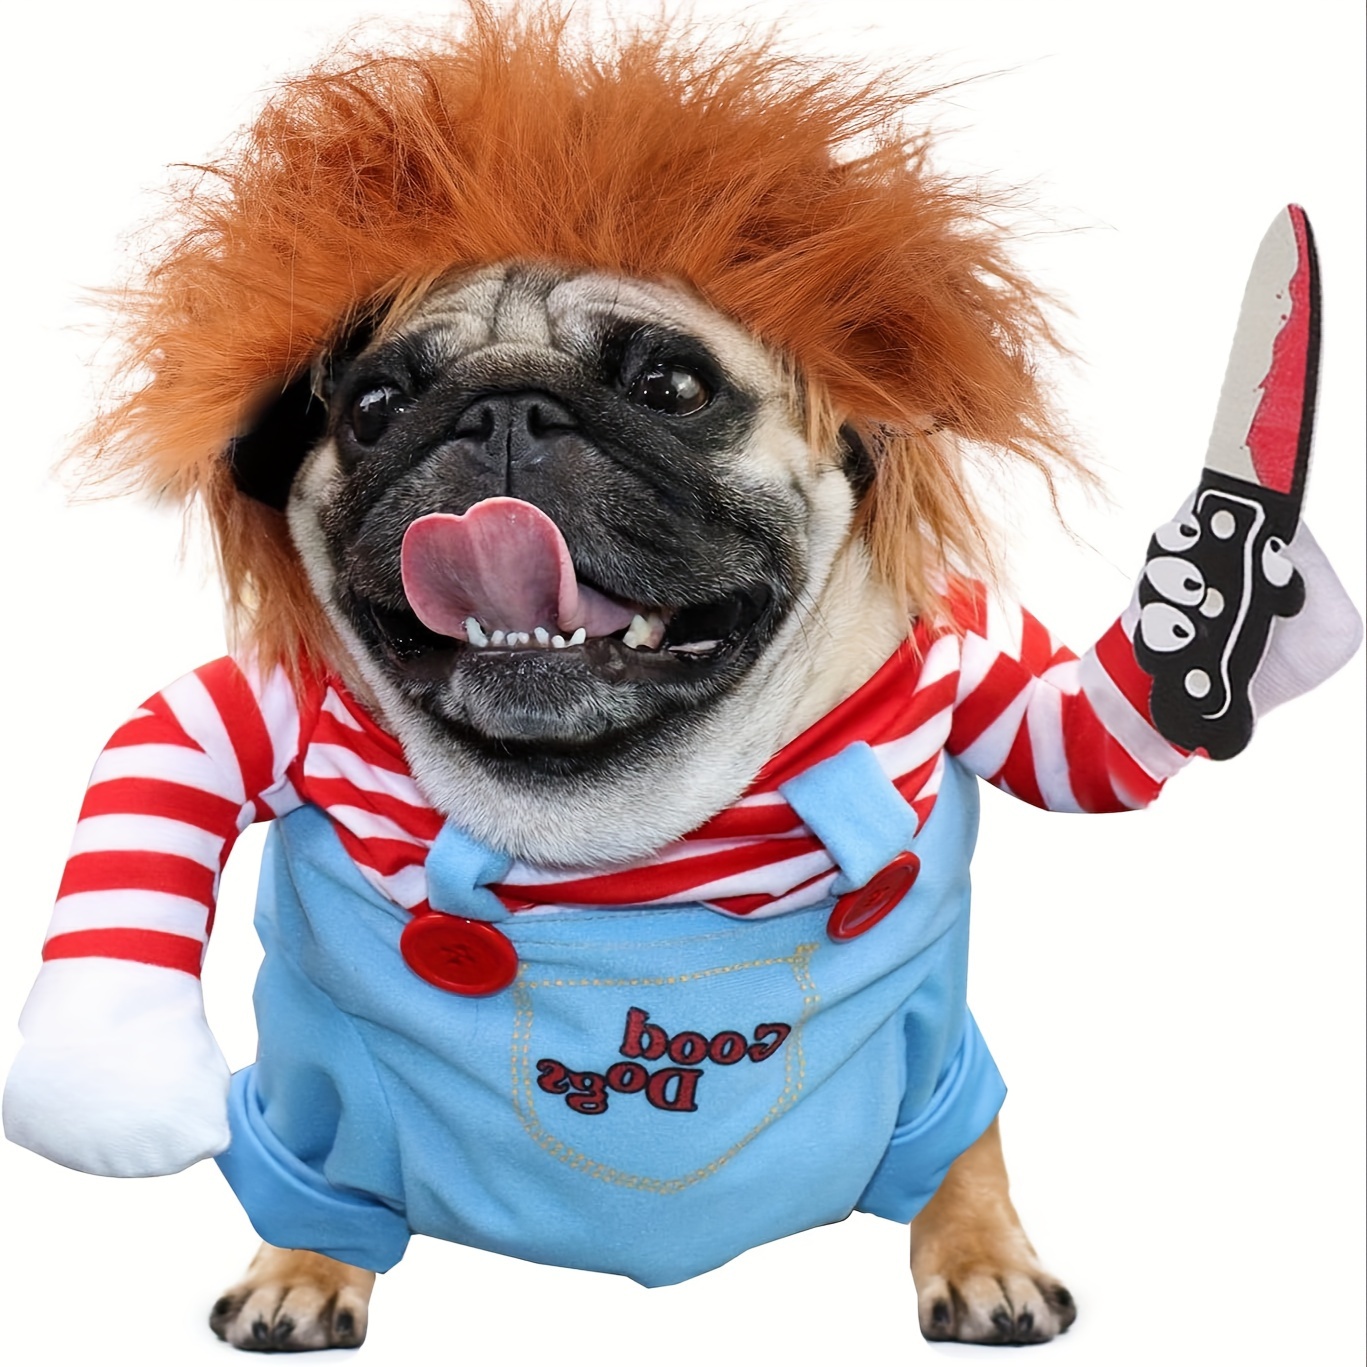 Novelty Dog Costume Party Cosplay Deadly Doll Cat Dog Clothes for Halloween  Christmas Cute Scary and Spooky Pet Costume